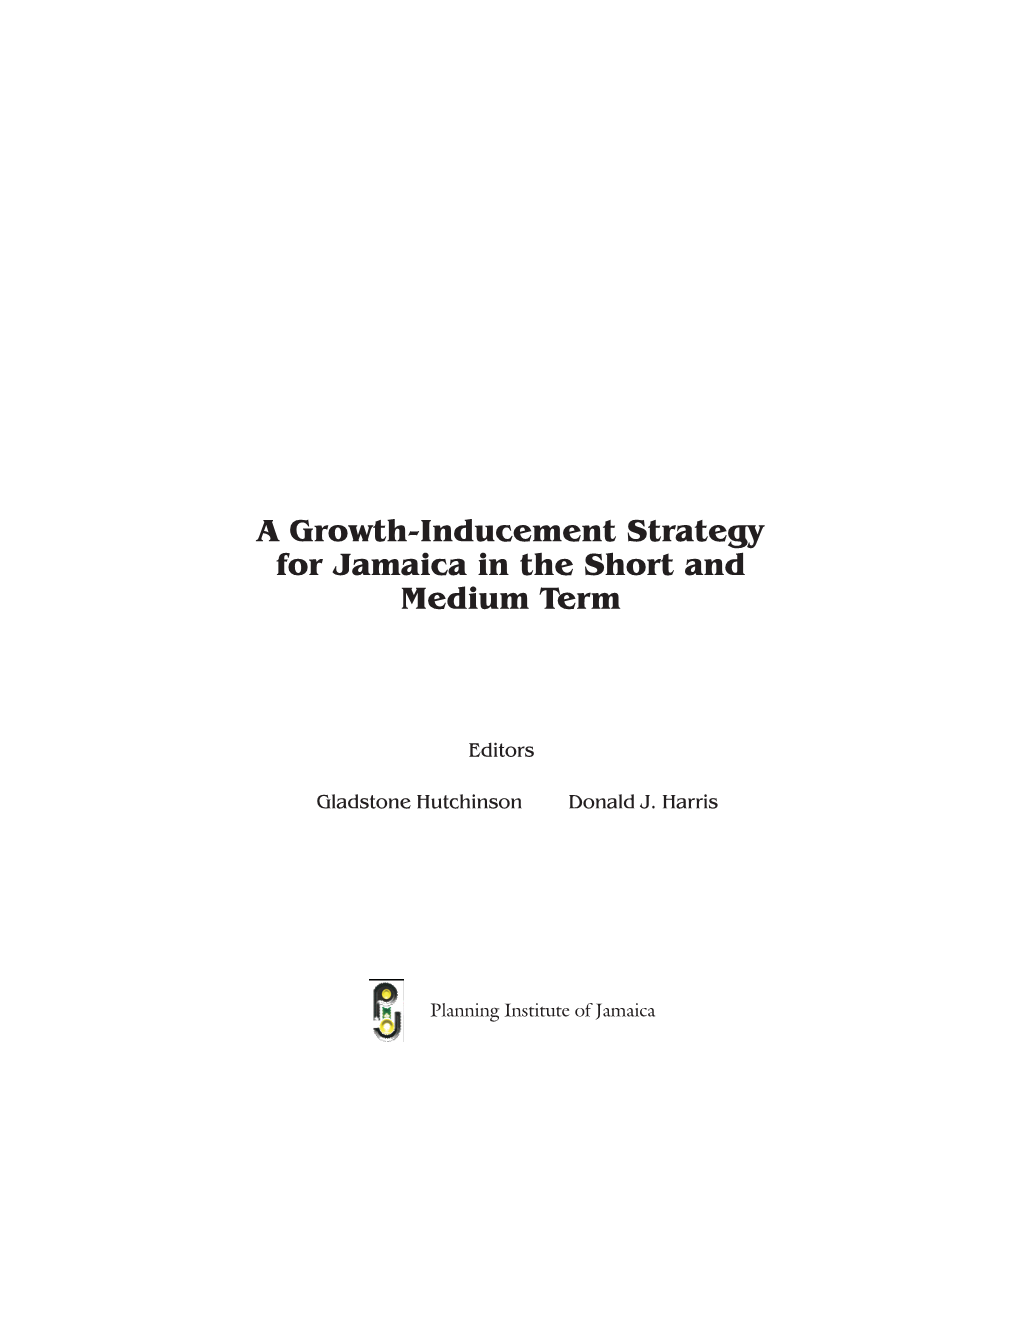 A Growth-Inducement Strategy for Jamaica in the Short and Medium Term